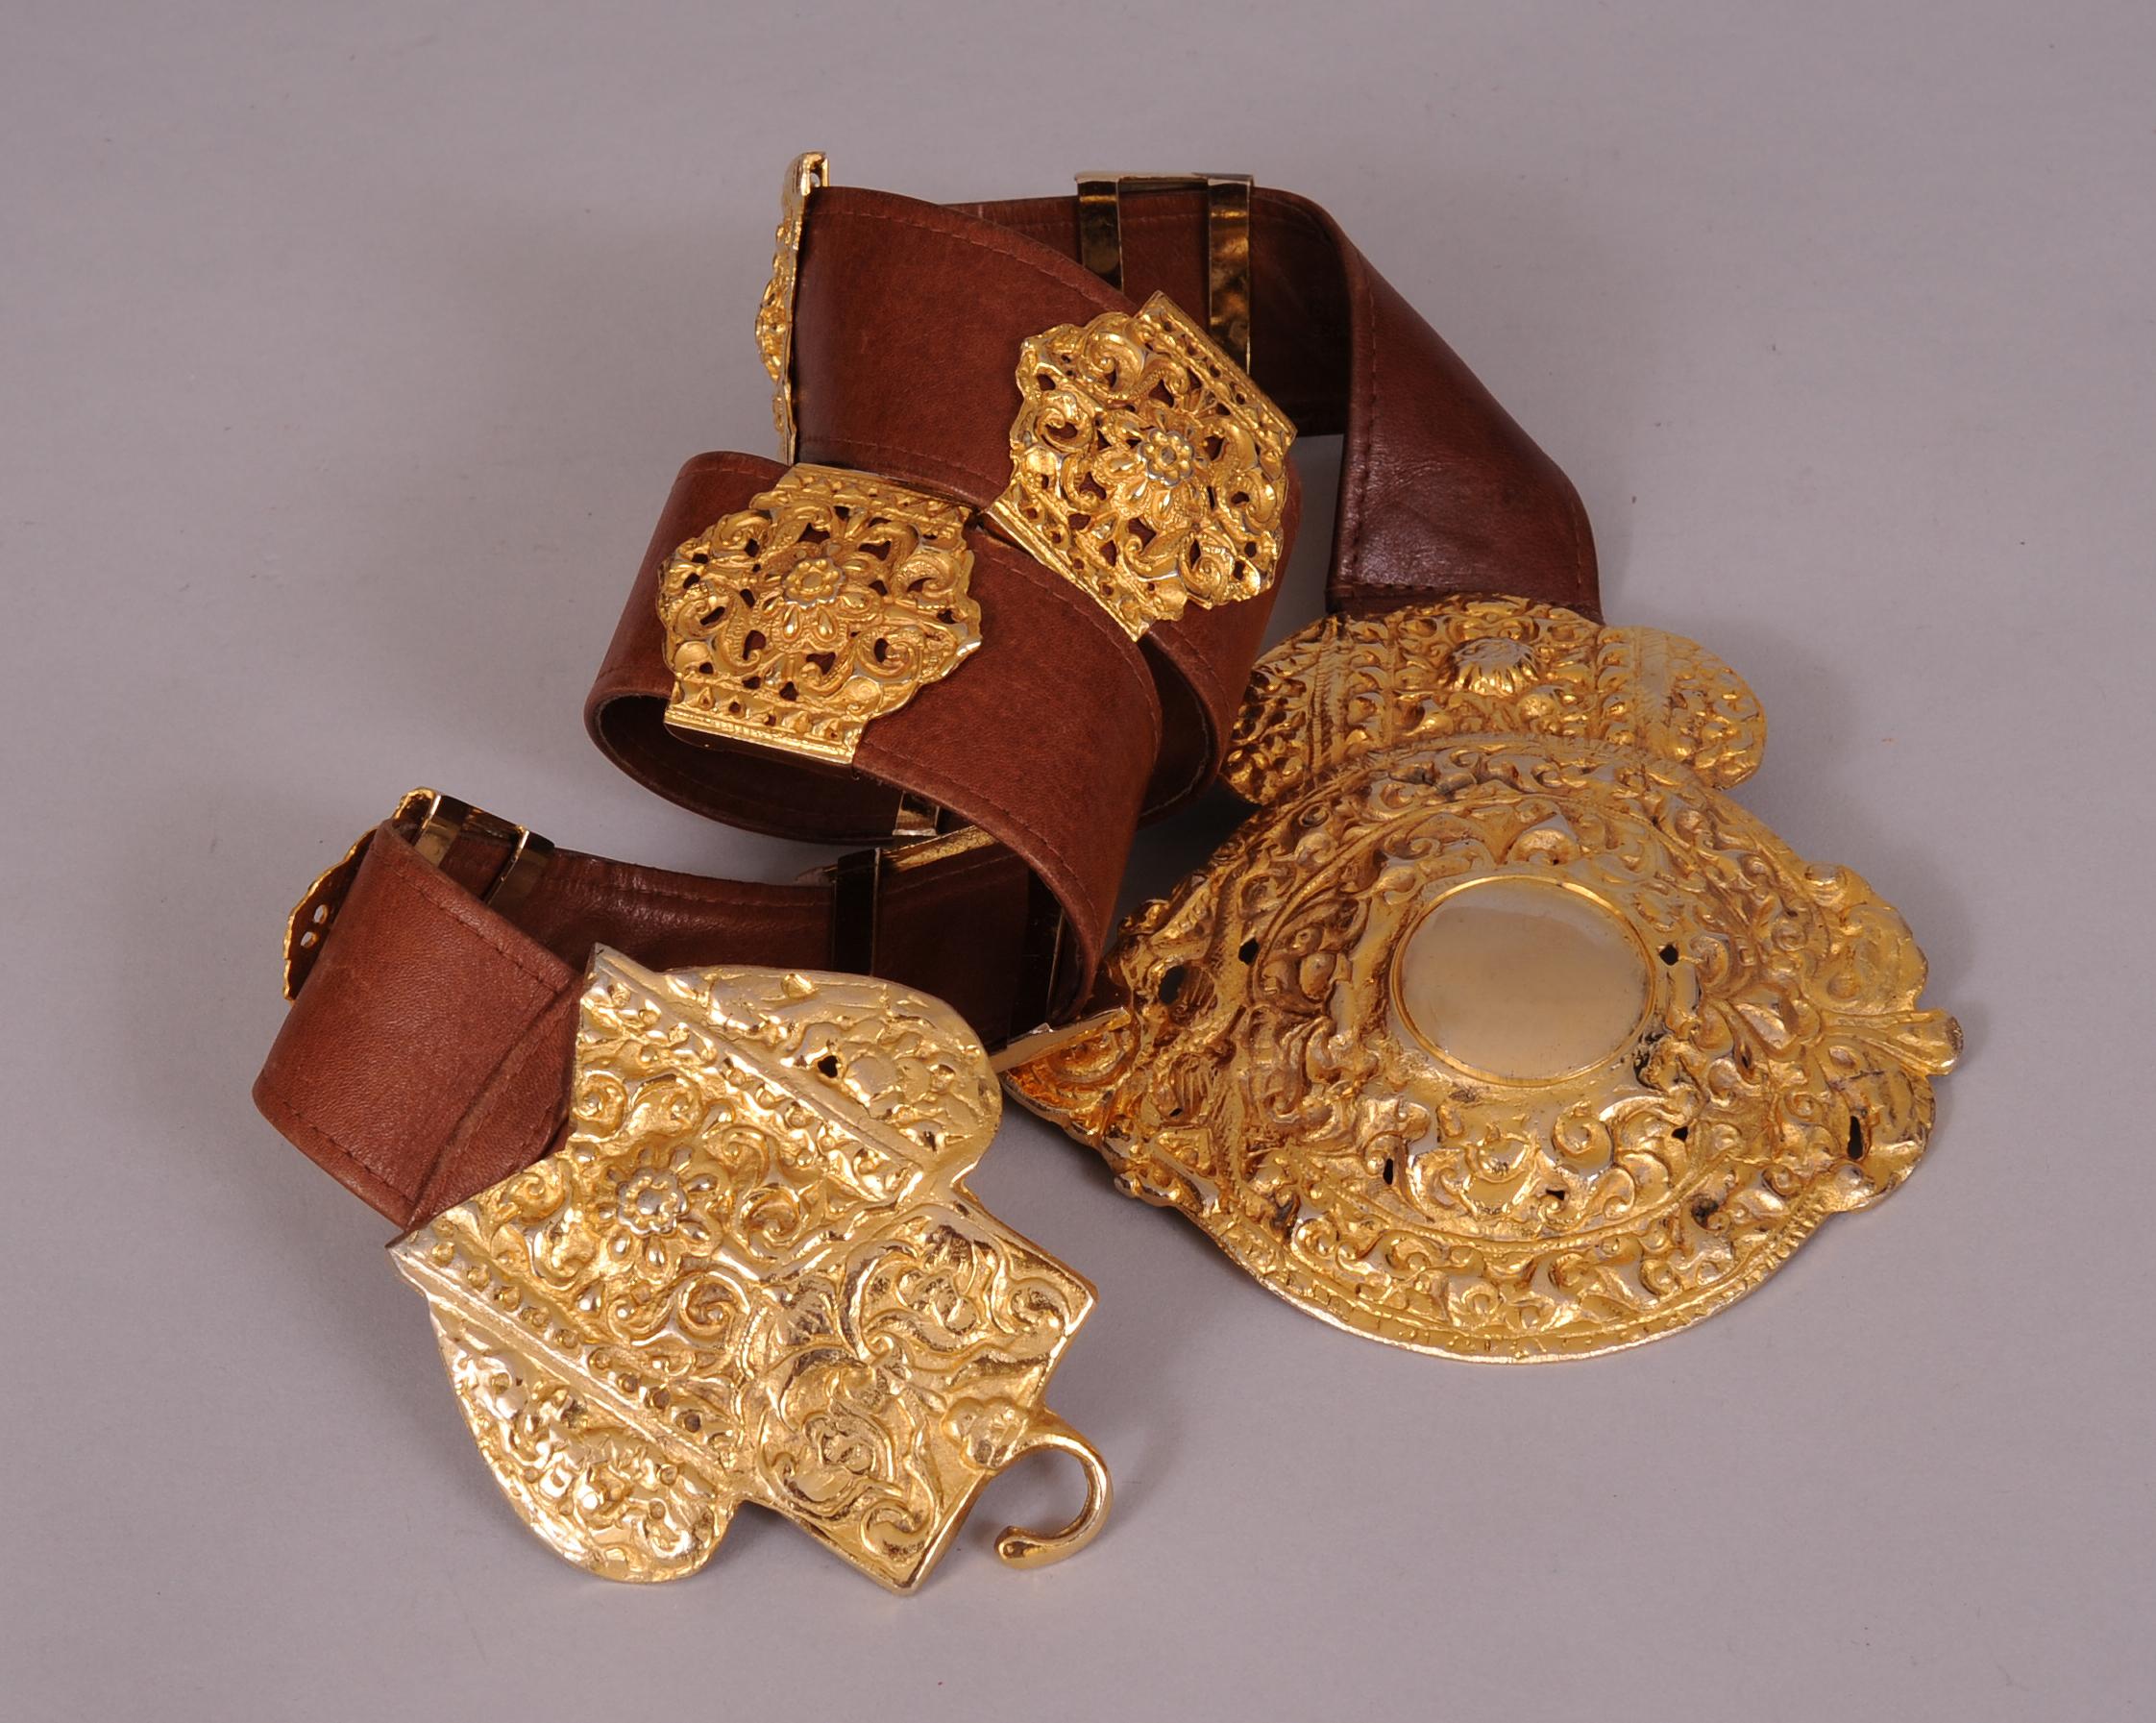 This supple brown leather belt is embellished with a large gold toned buckle and seven decorative slides in two different styles. The belt is stamped  Made in Italy by Roberta Di Camerino Expressly for Saks Fifth Ave. It is in excellent condition